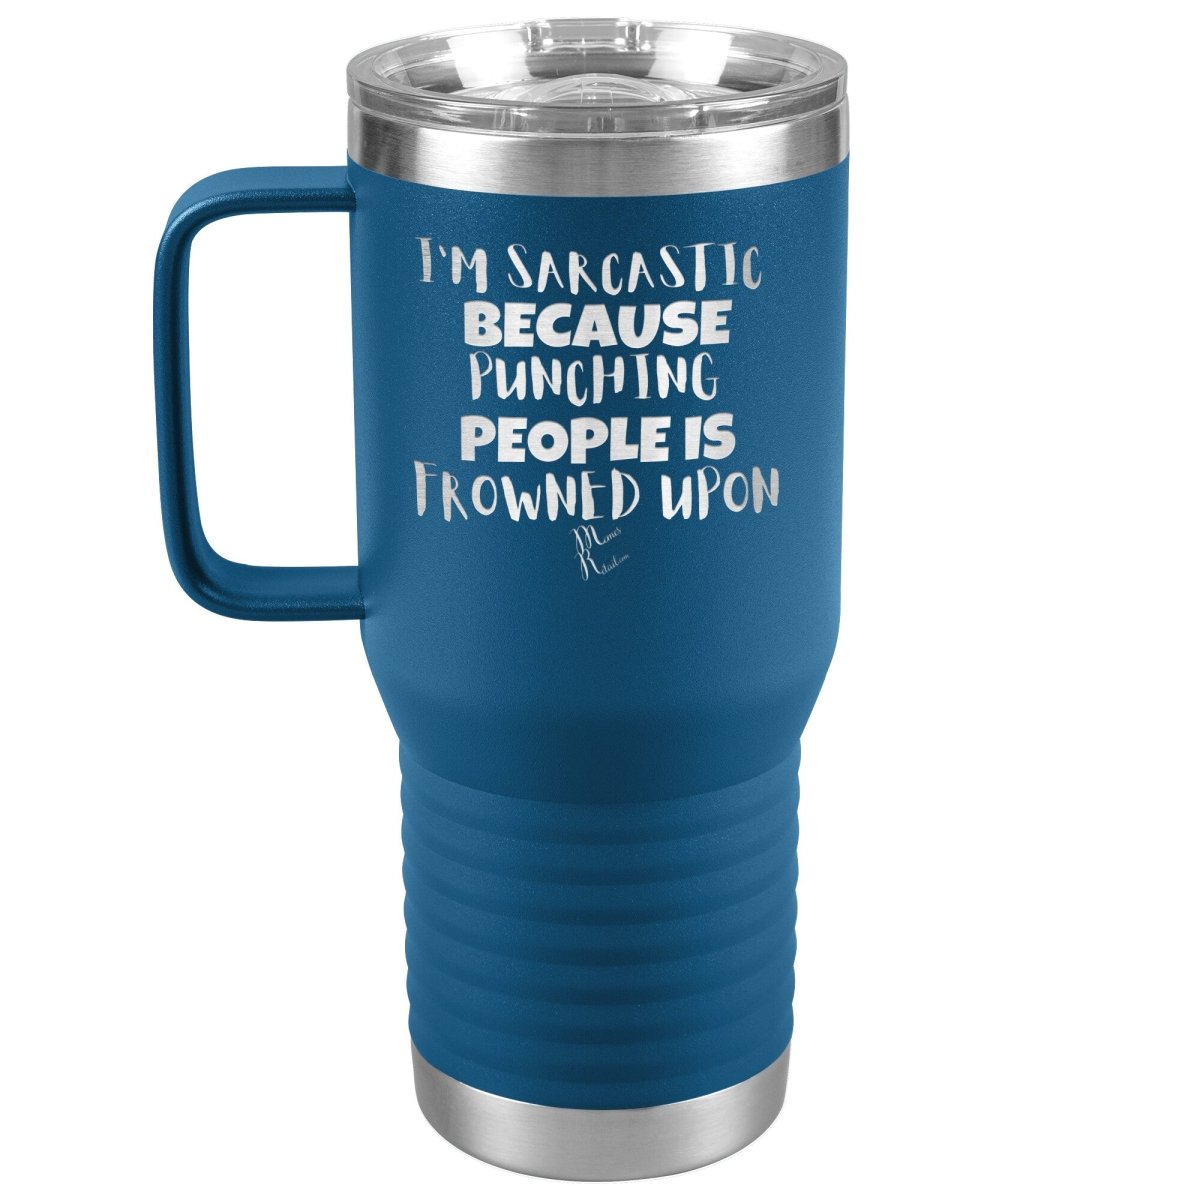 I'm Sarcastic Because Punching People is Frowned Upon Tumblers, 20oz Travel Tumbler / Blue - MemesRetail.com